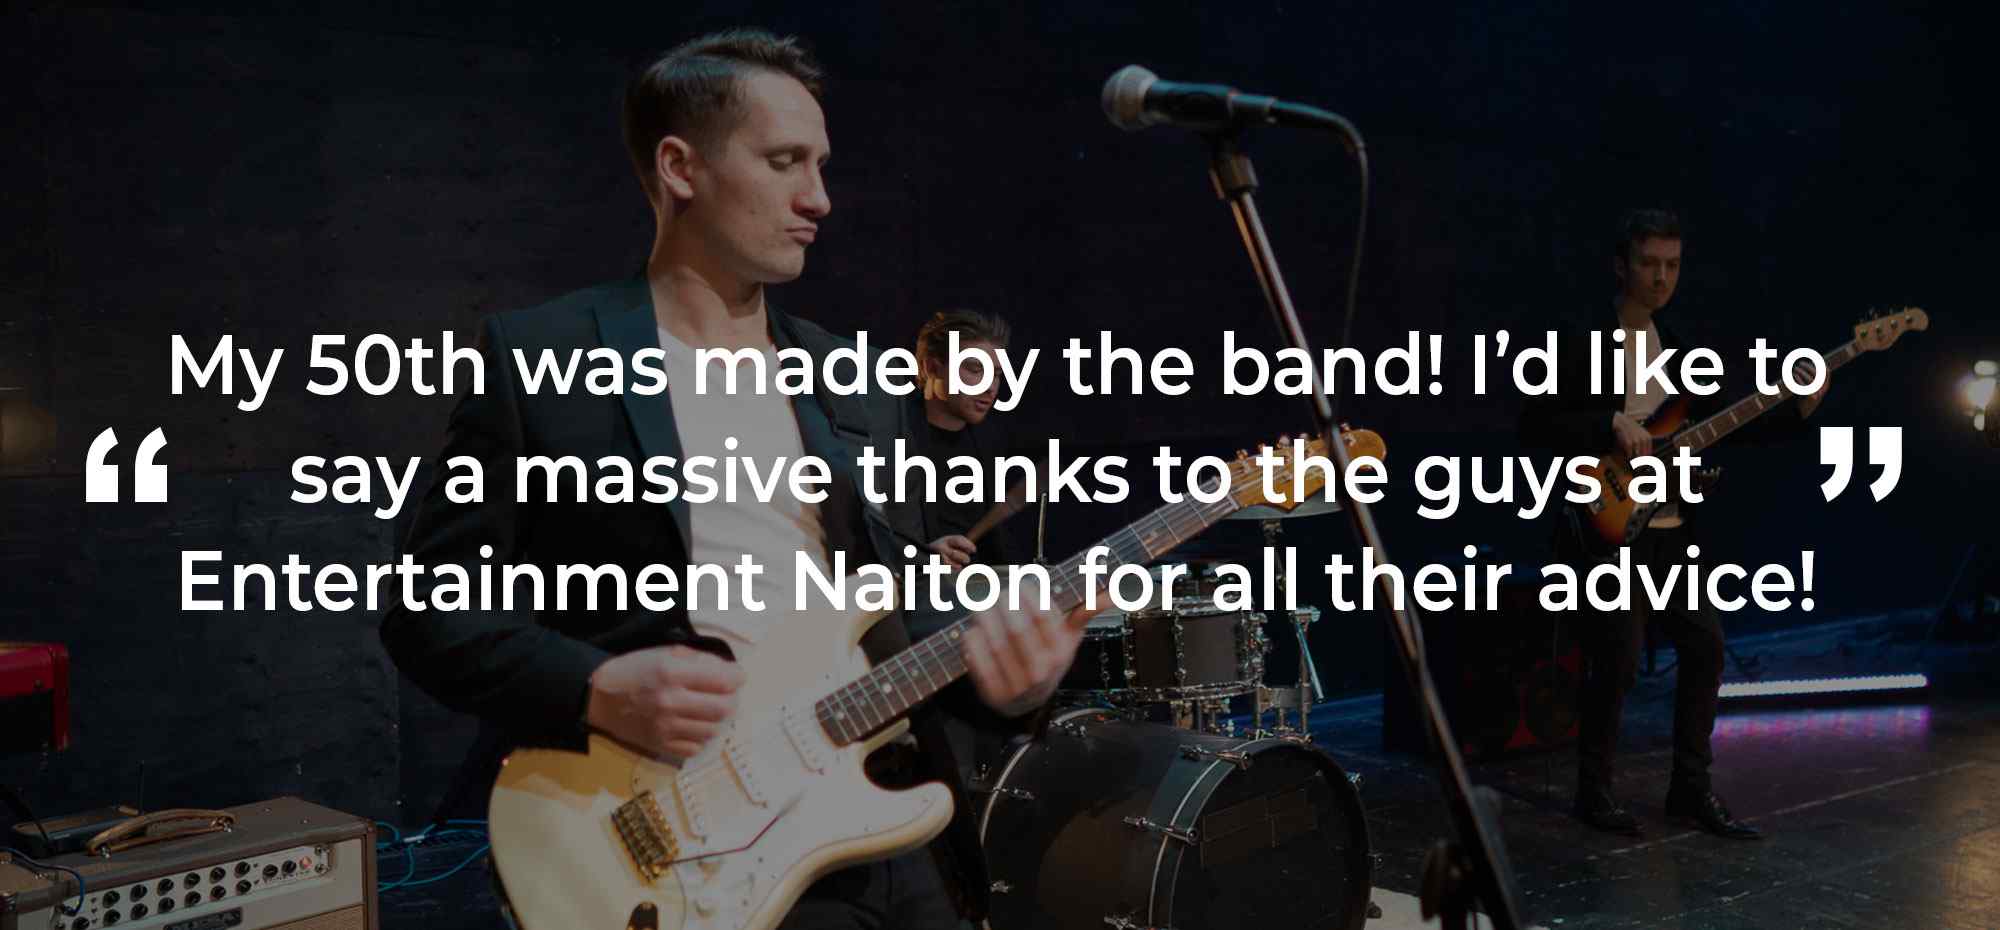 Client Review of a Party Band South Glamorgan